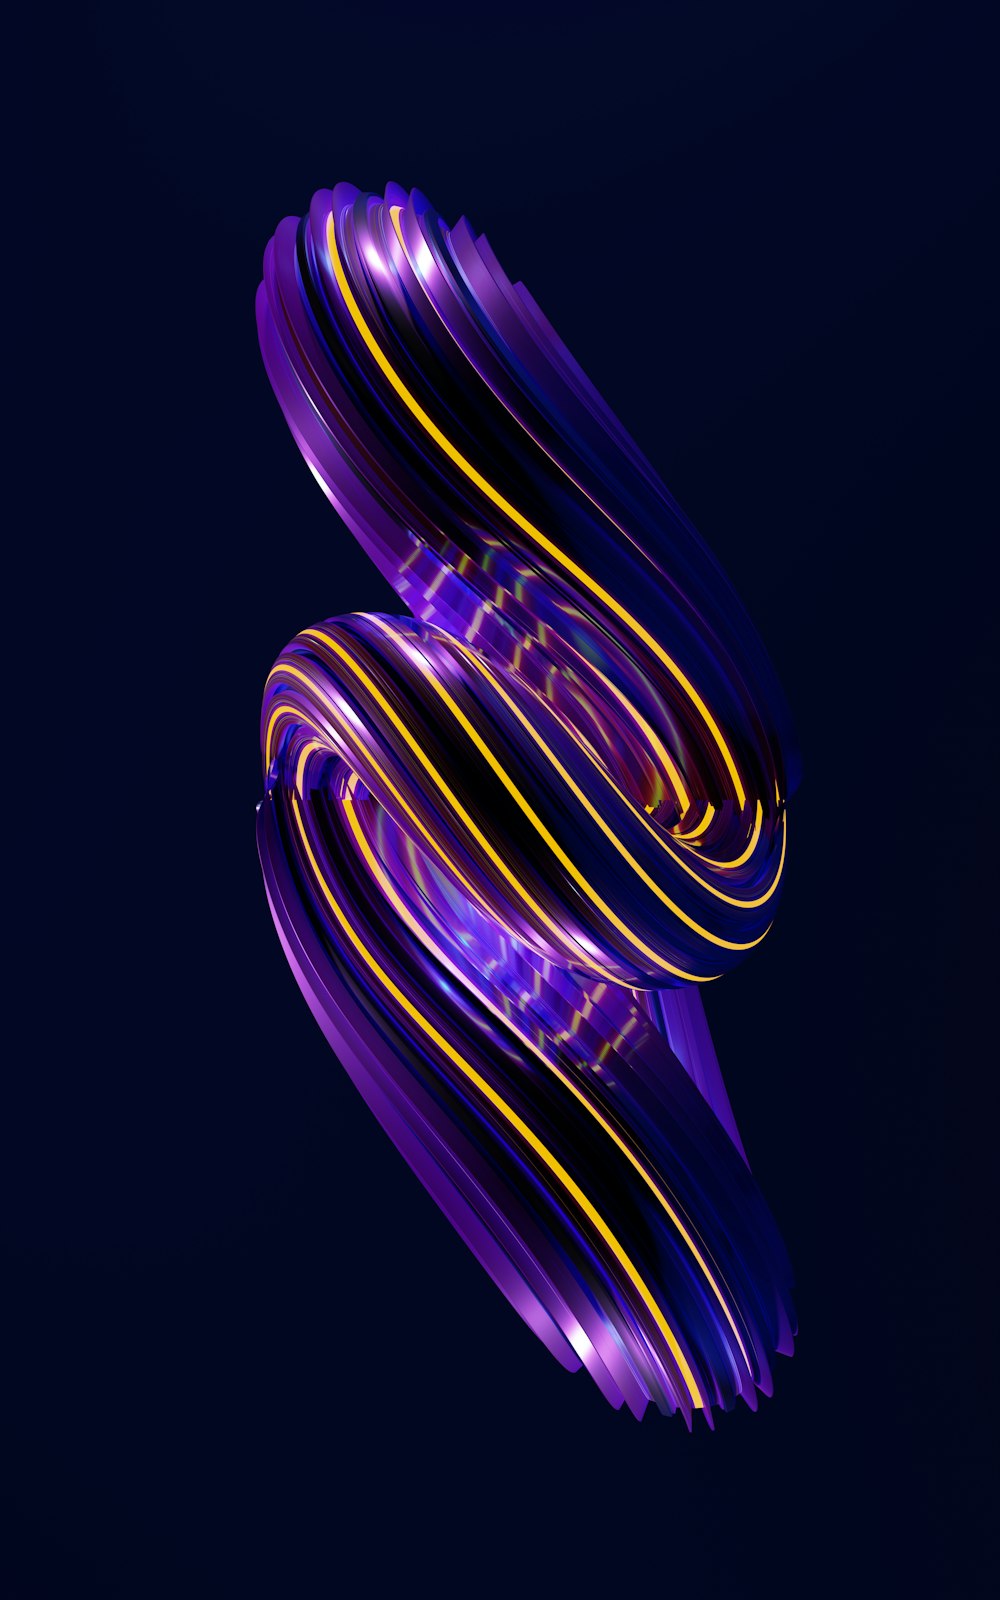 a purple and yellow swirl on a black background